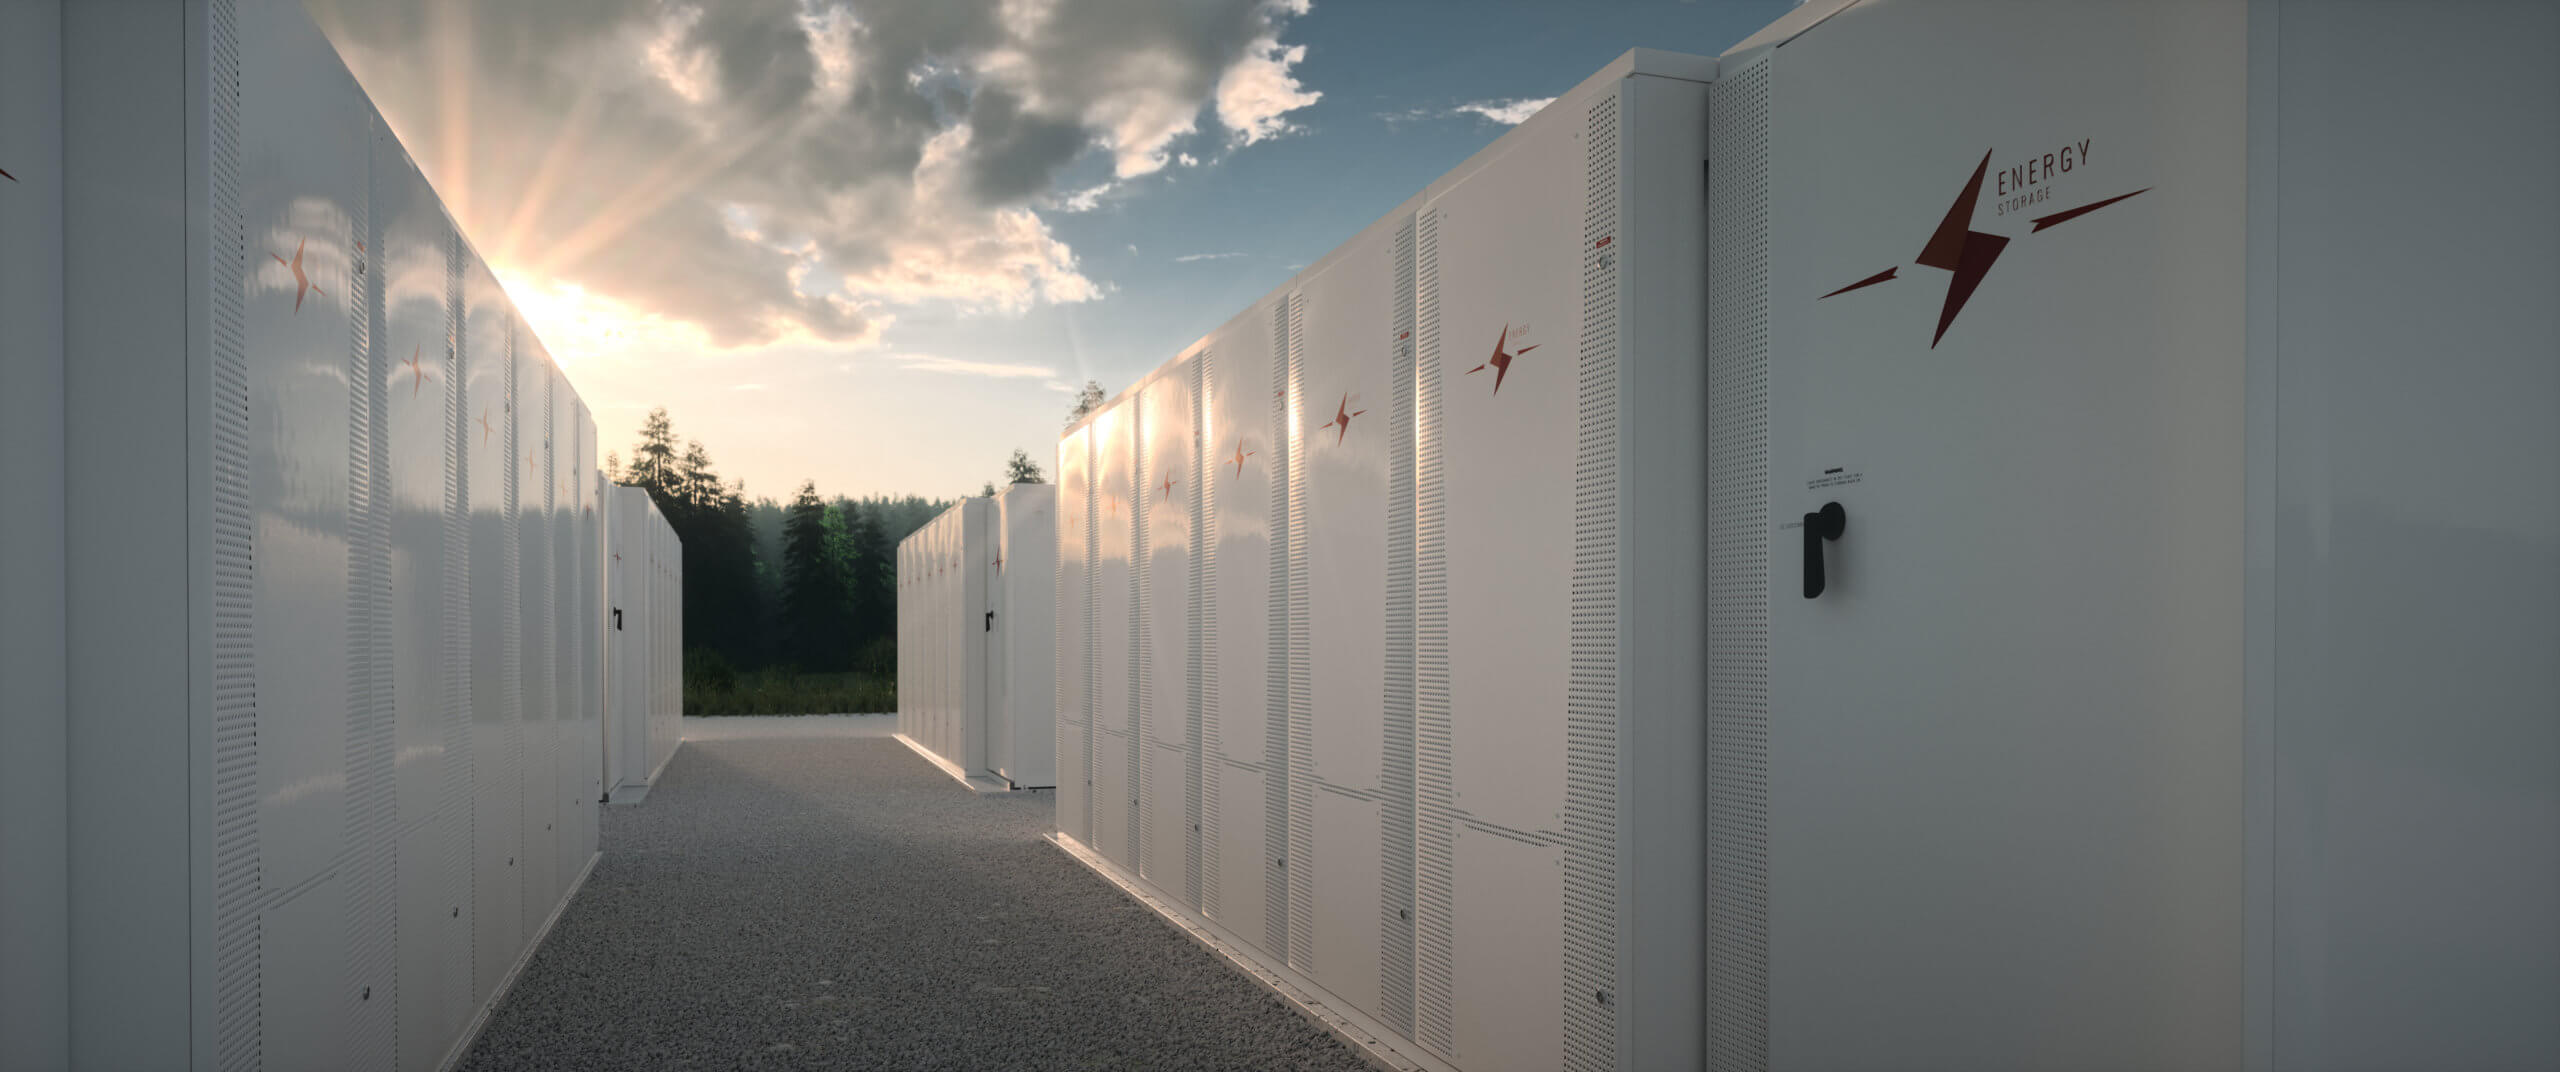 Rendering of an outdoor renewable energy battery storage system.